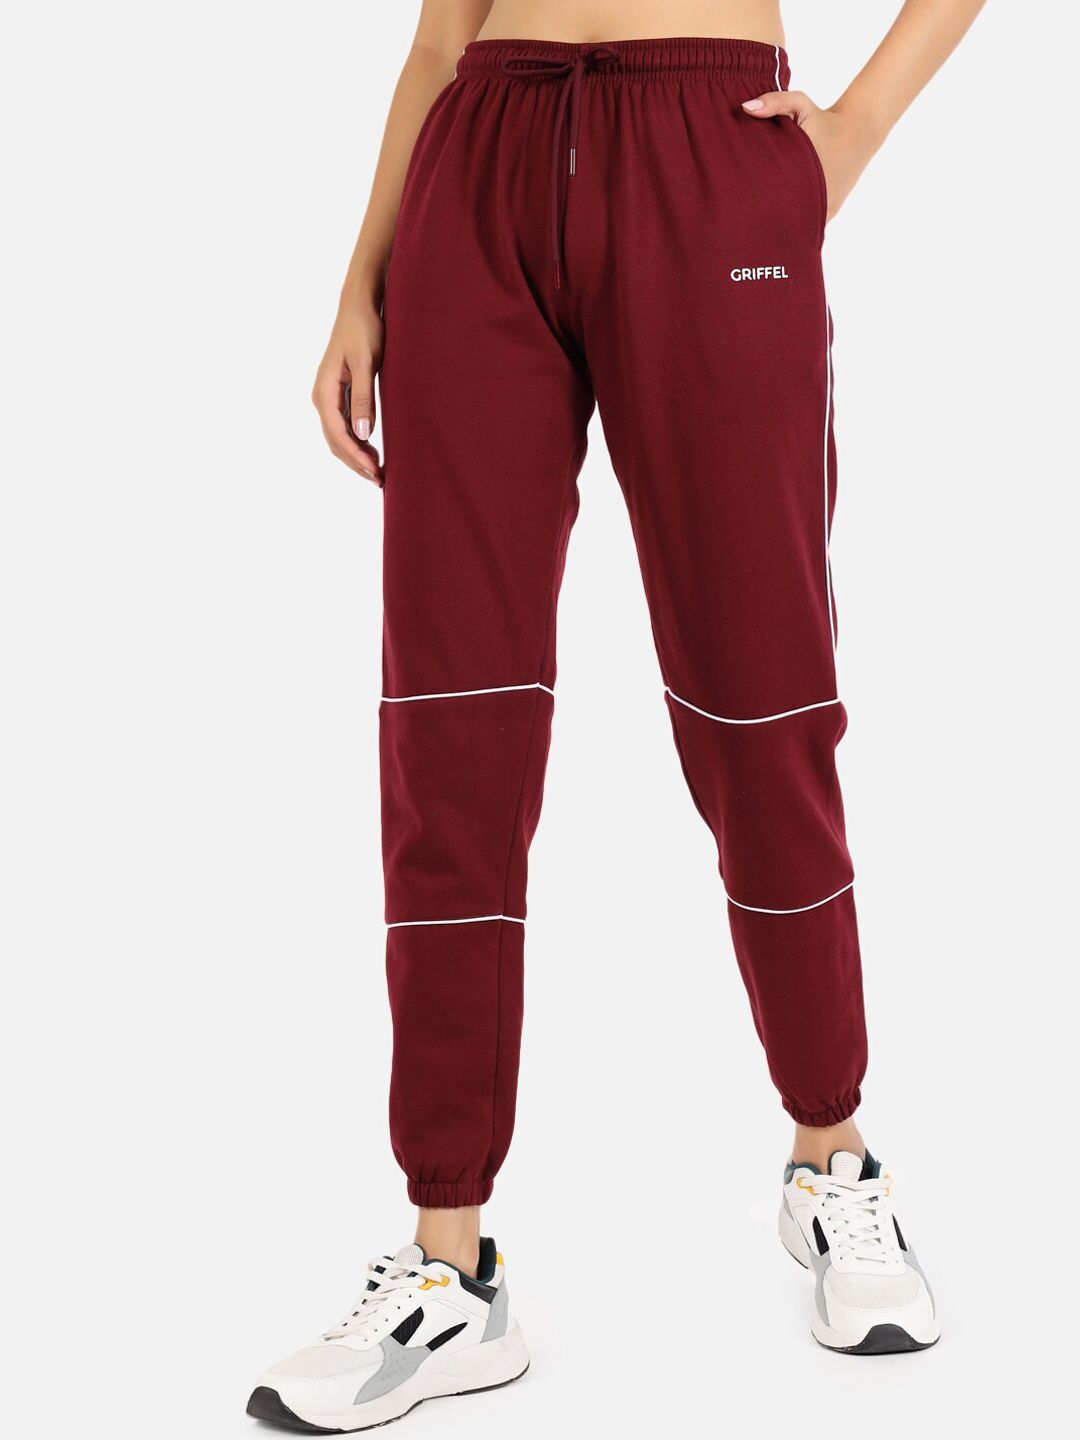 GRIFFEL Women Maroon Solid Cotton Joggers Price in India